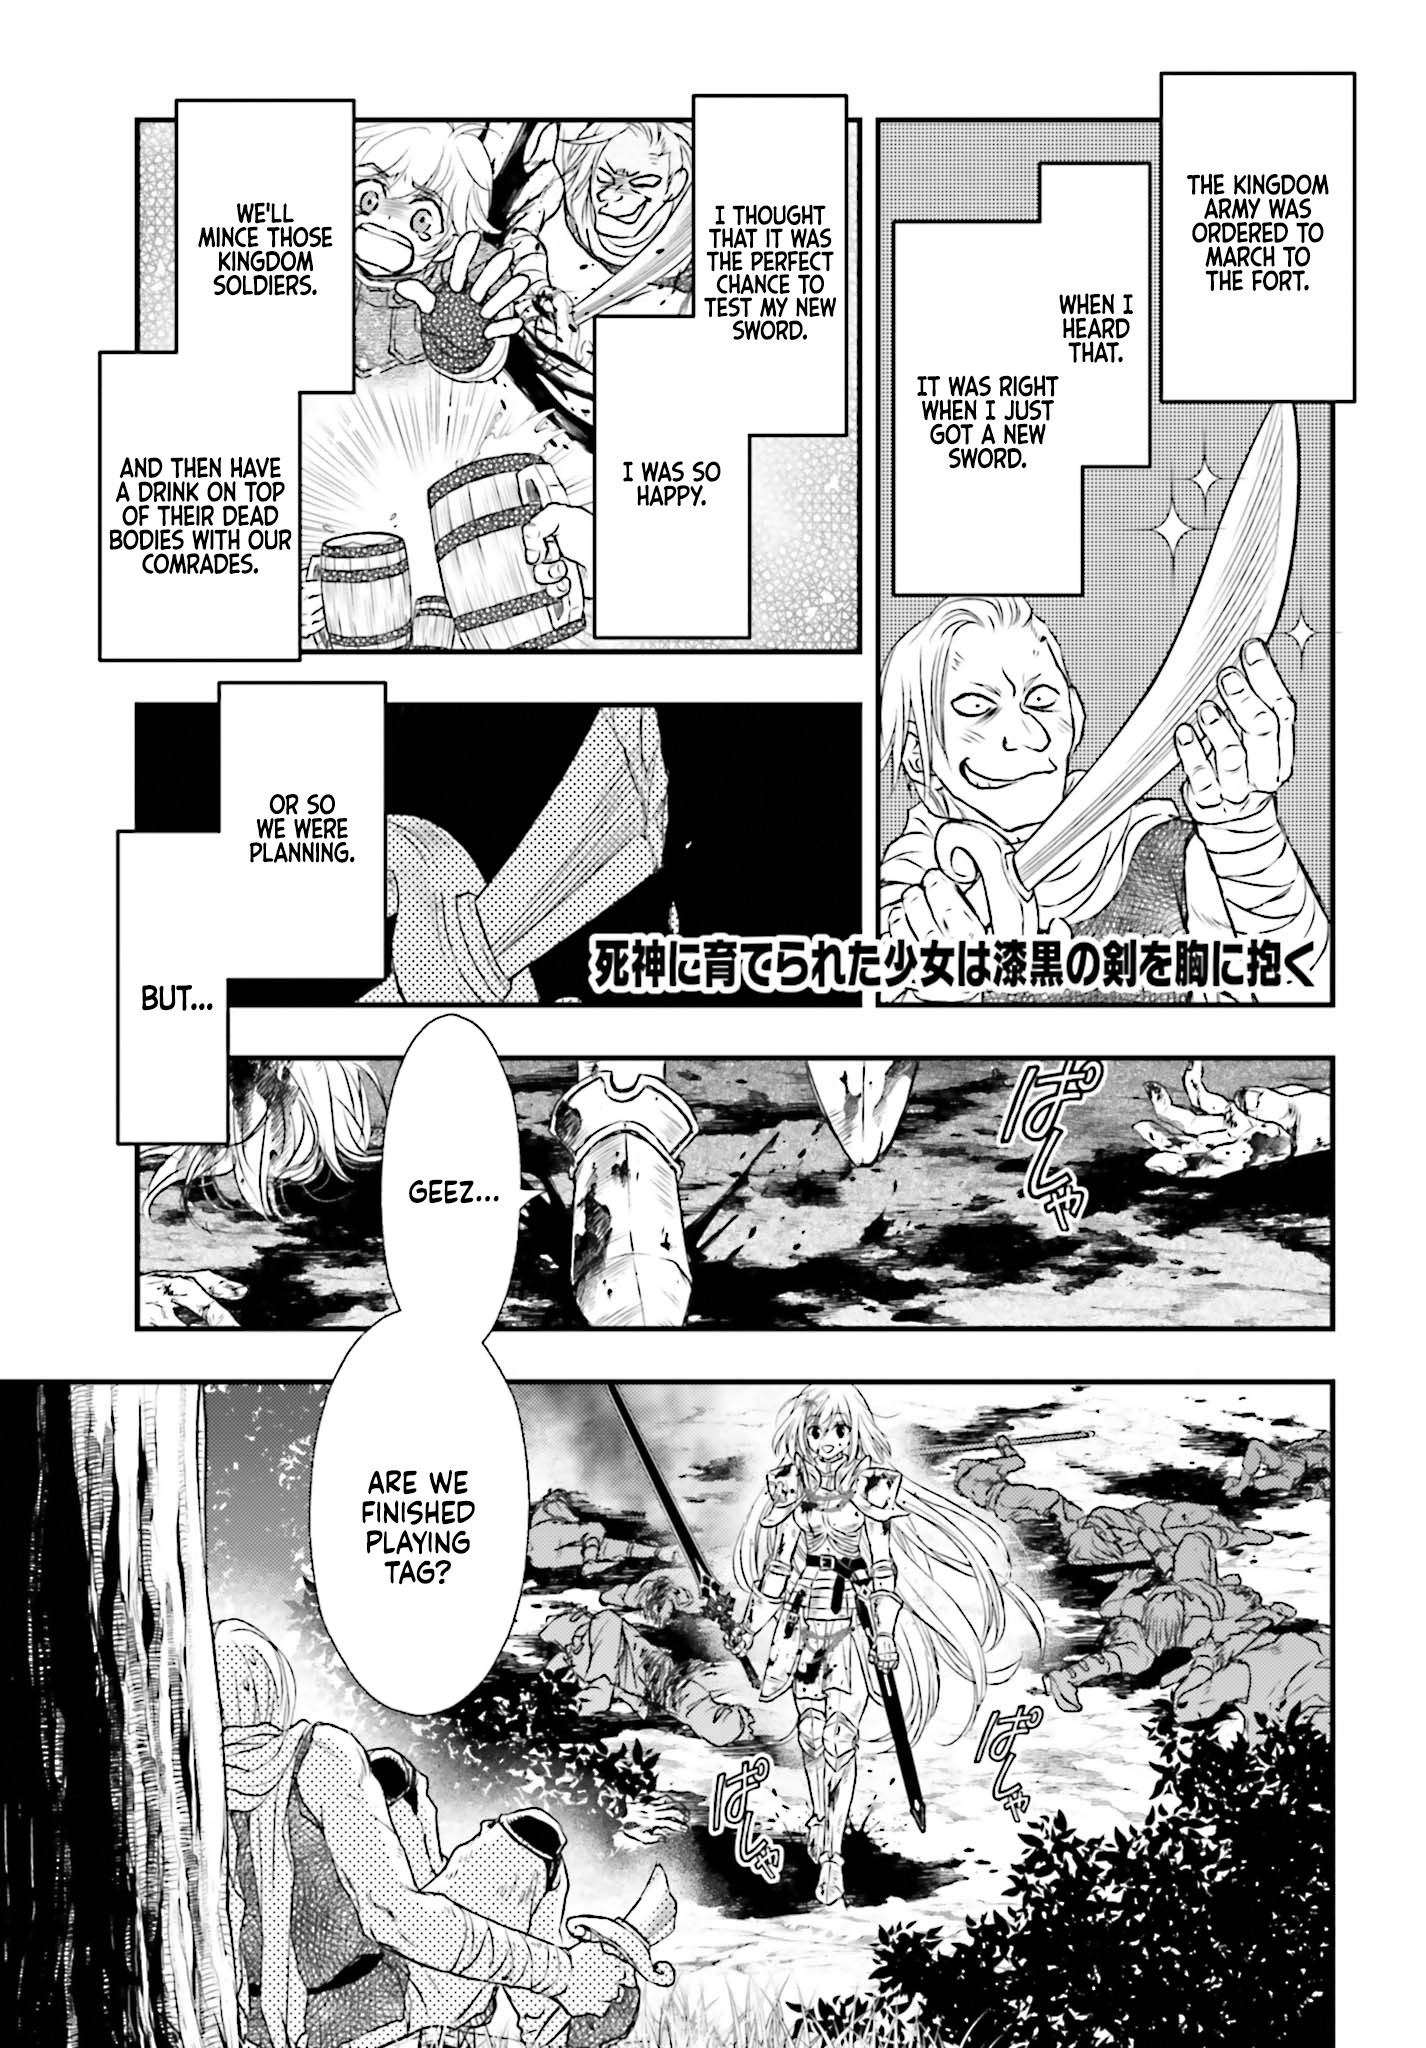 The Little Girl Raised By Death Hold The Sword Of Death Tight - Page 2